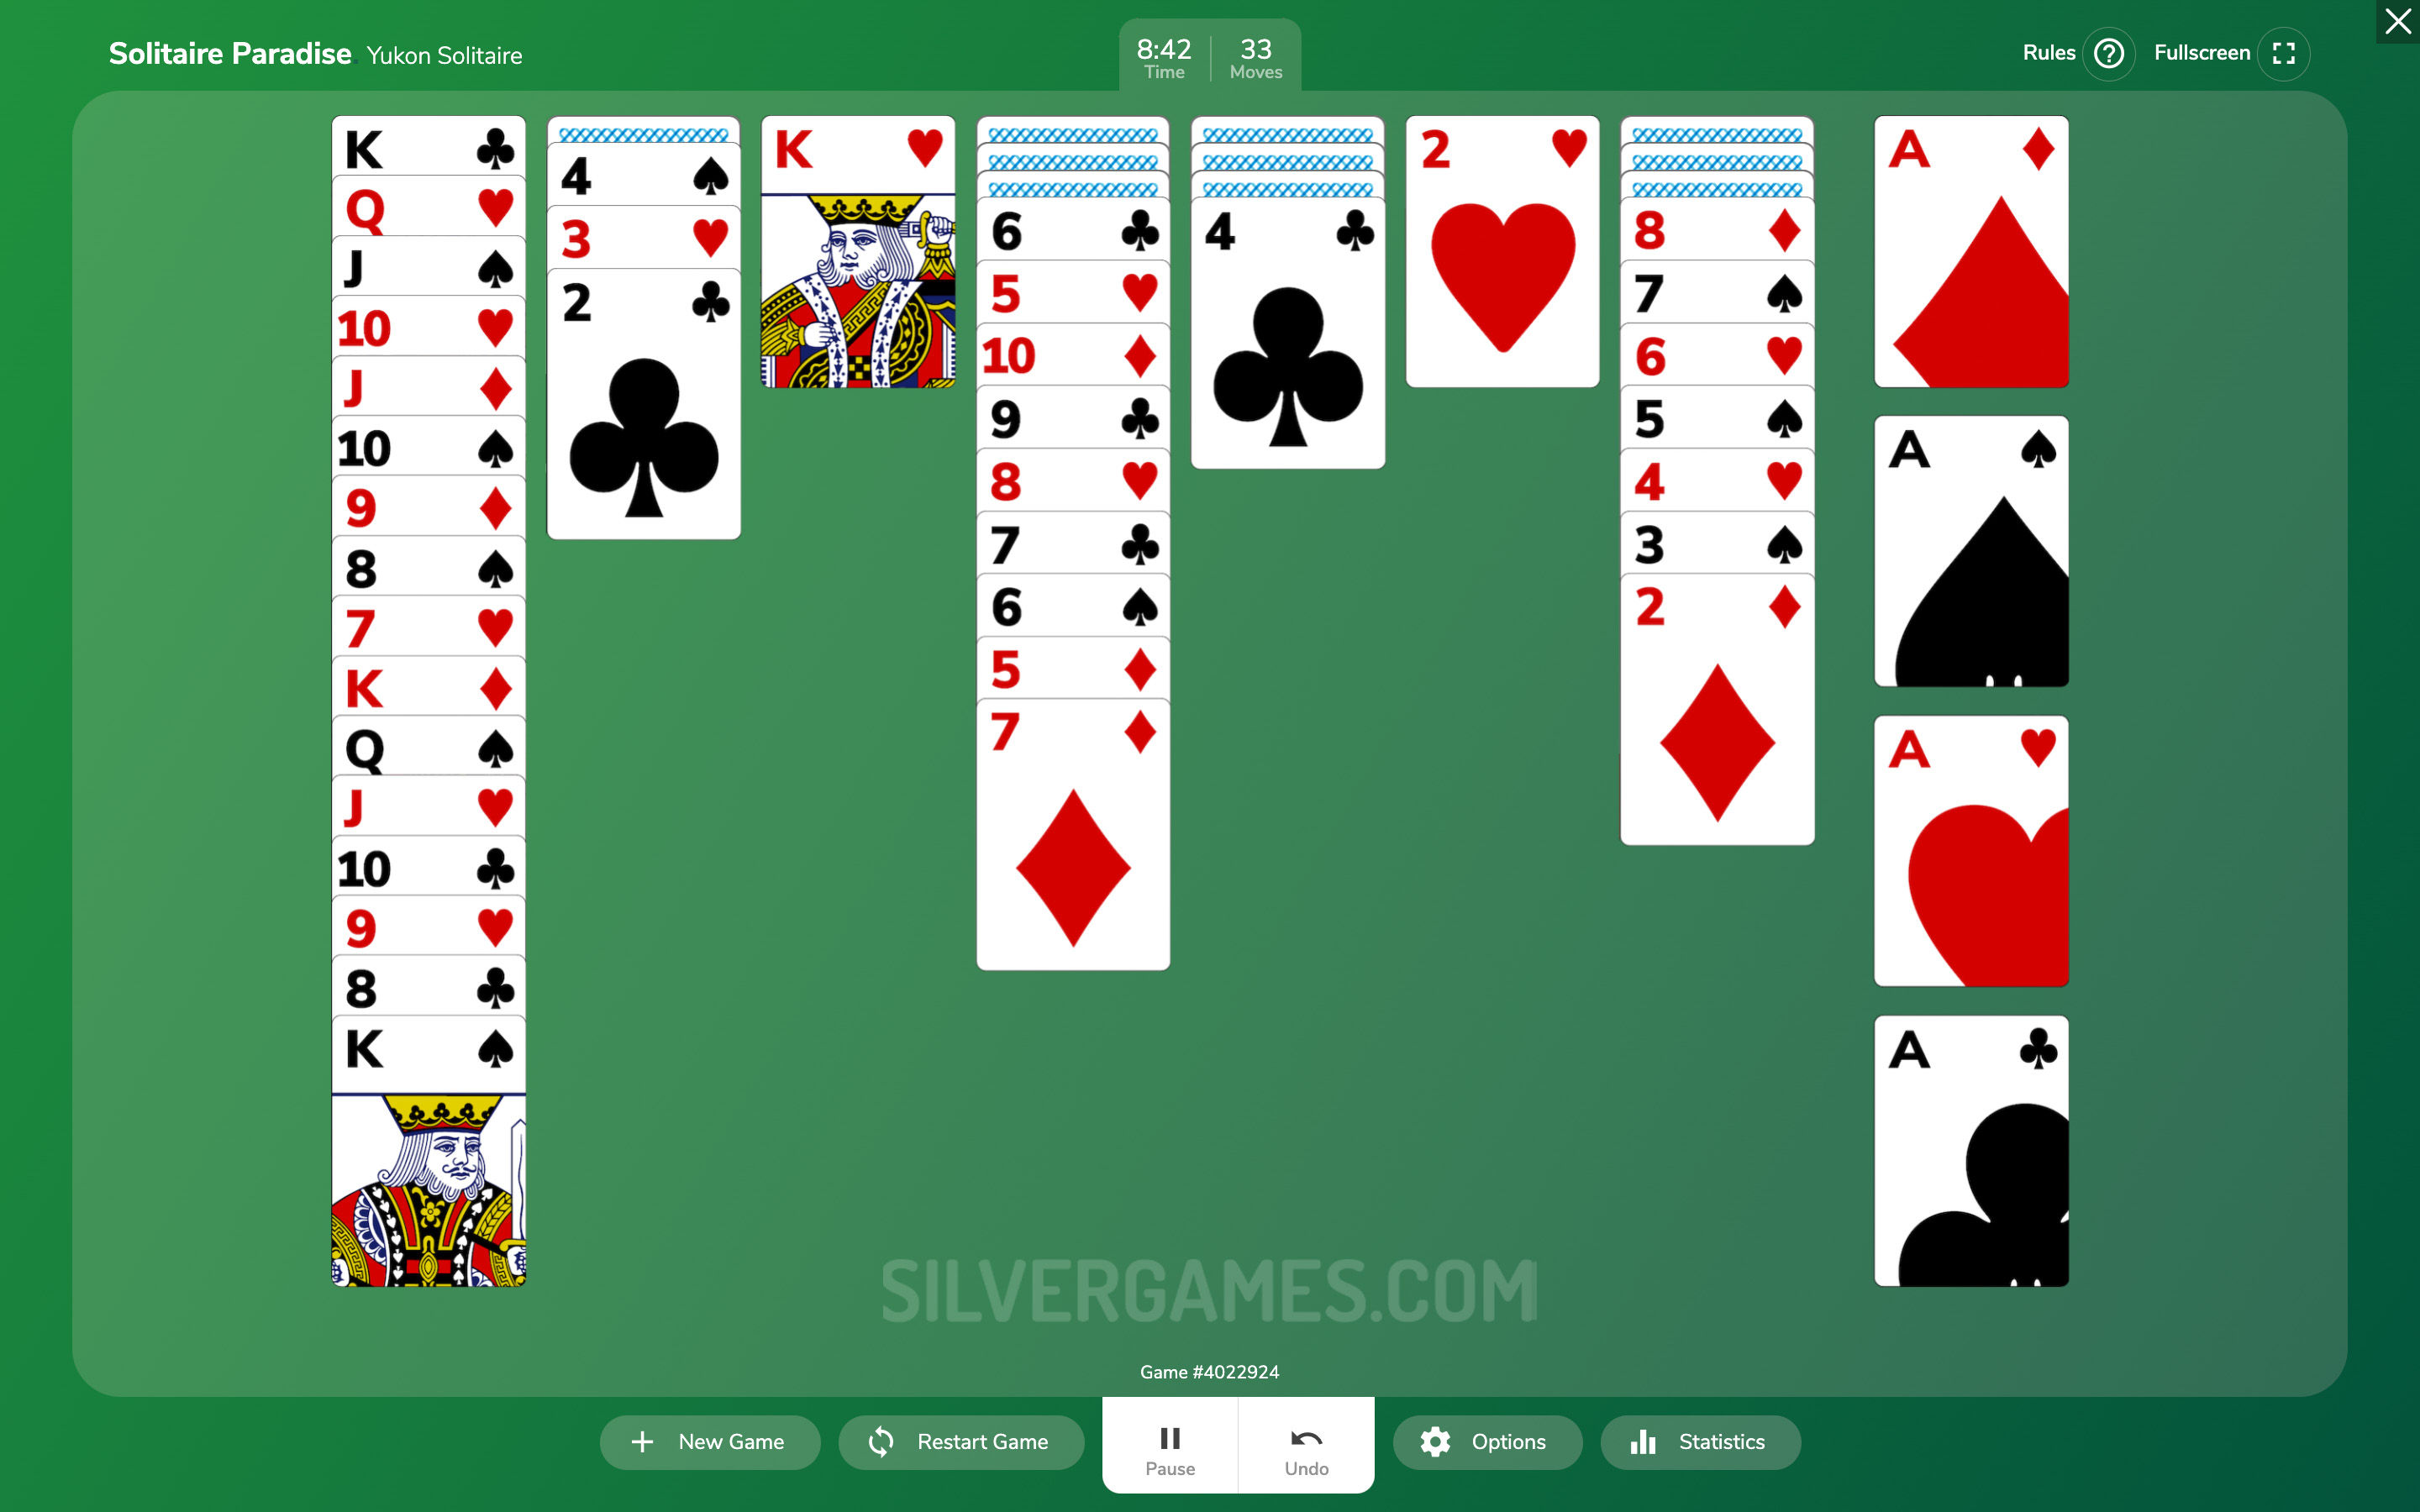 Yukon Solitaire - Play Online